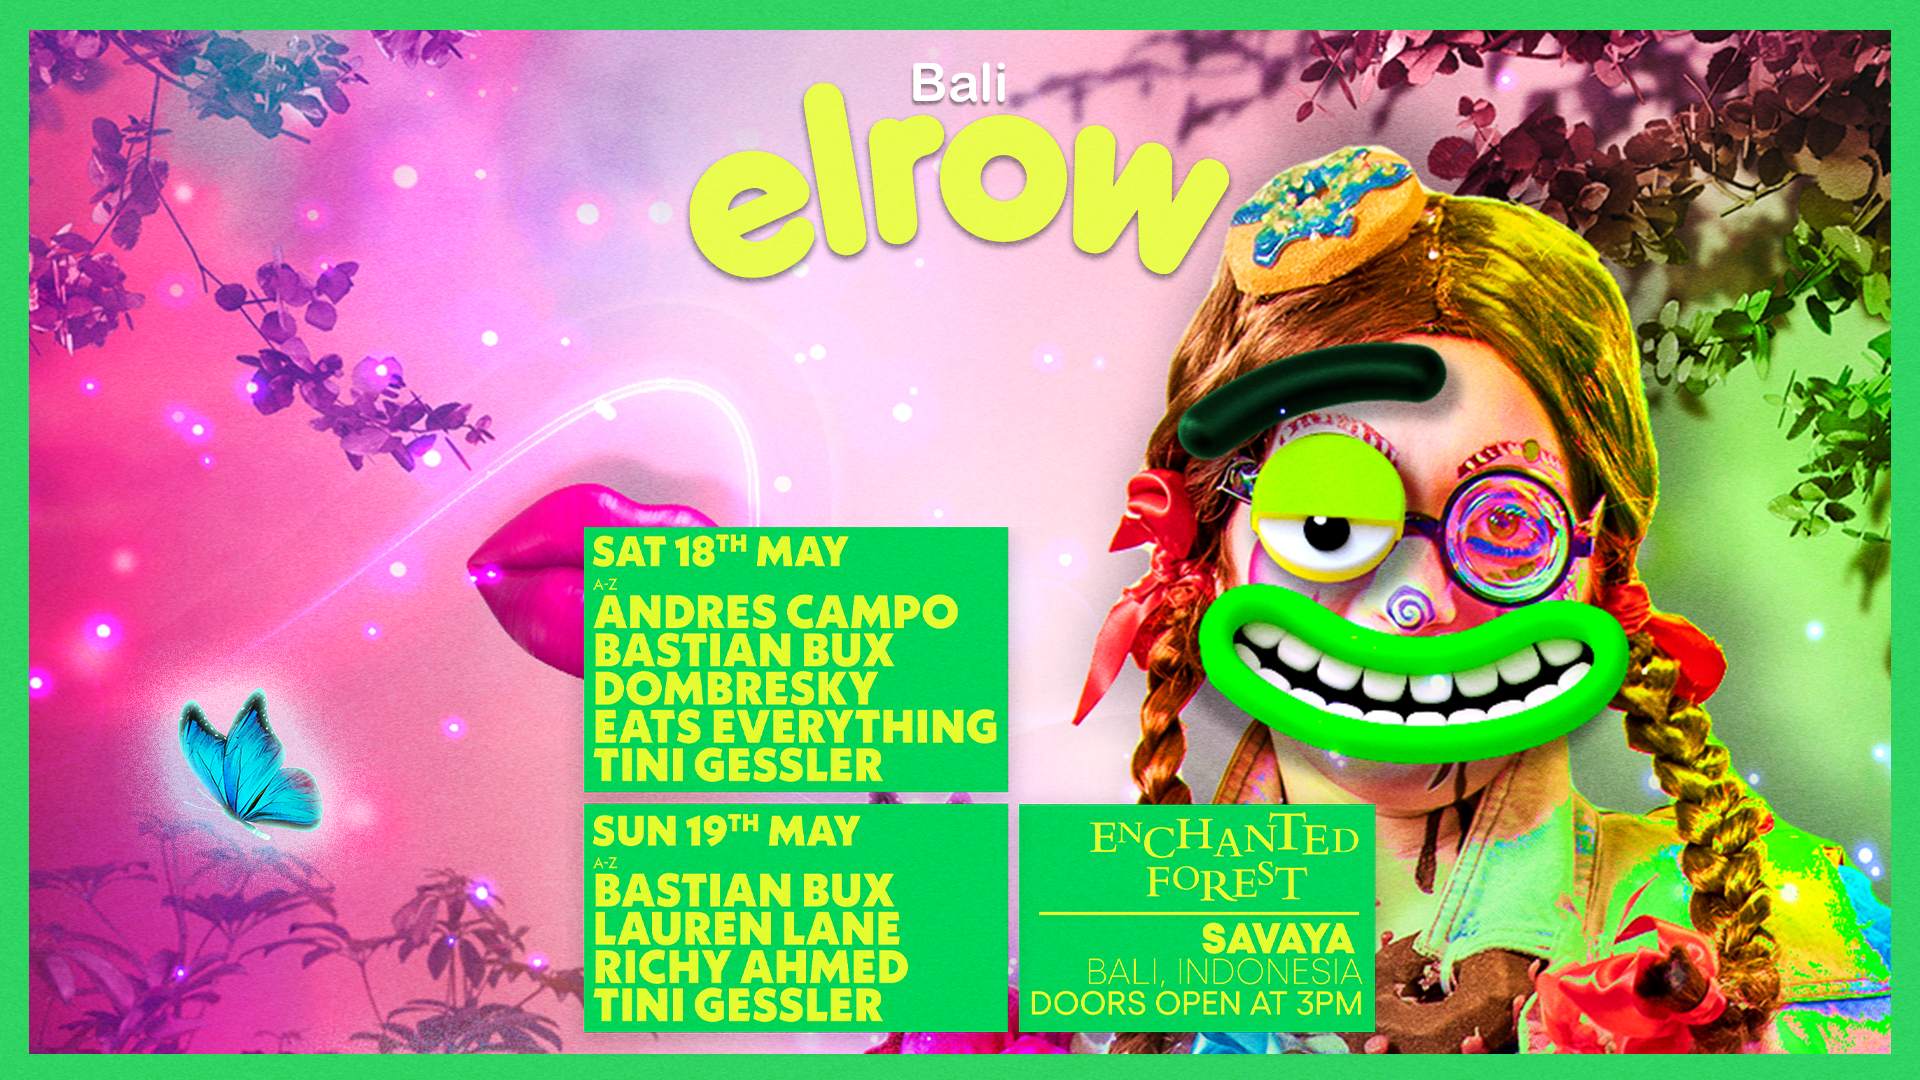 Elrow - May 18 - フライヤー表